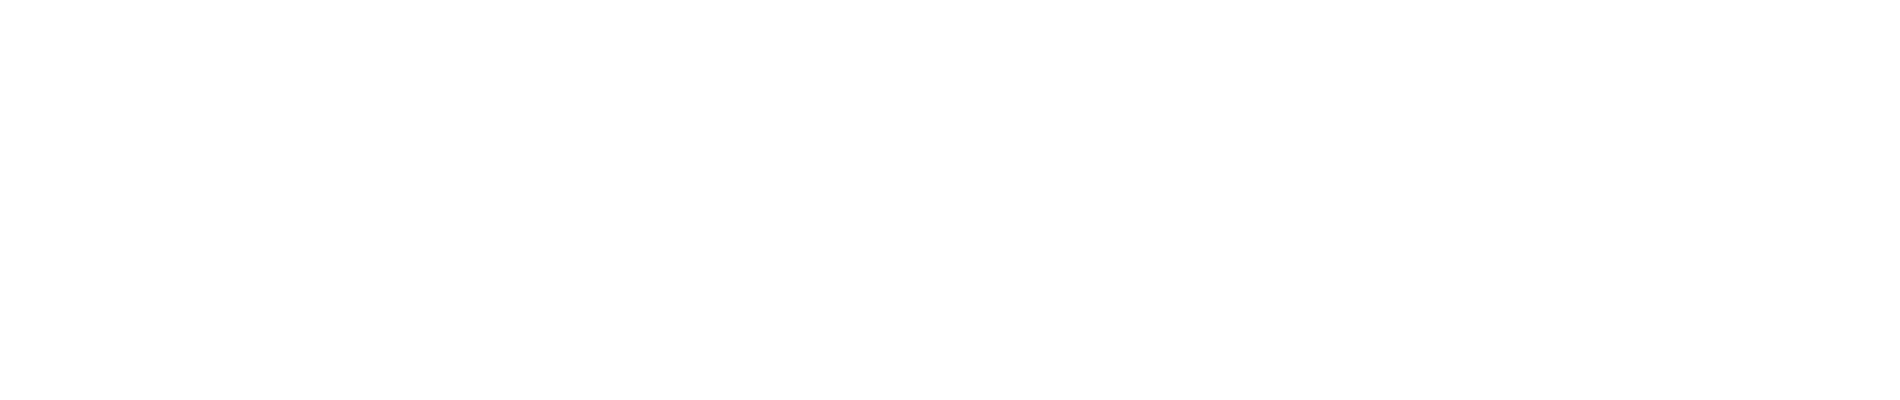 Pandemic Unleashed